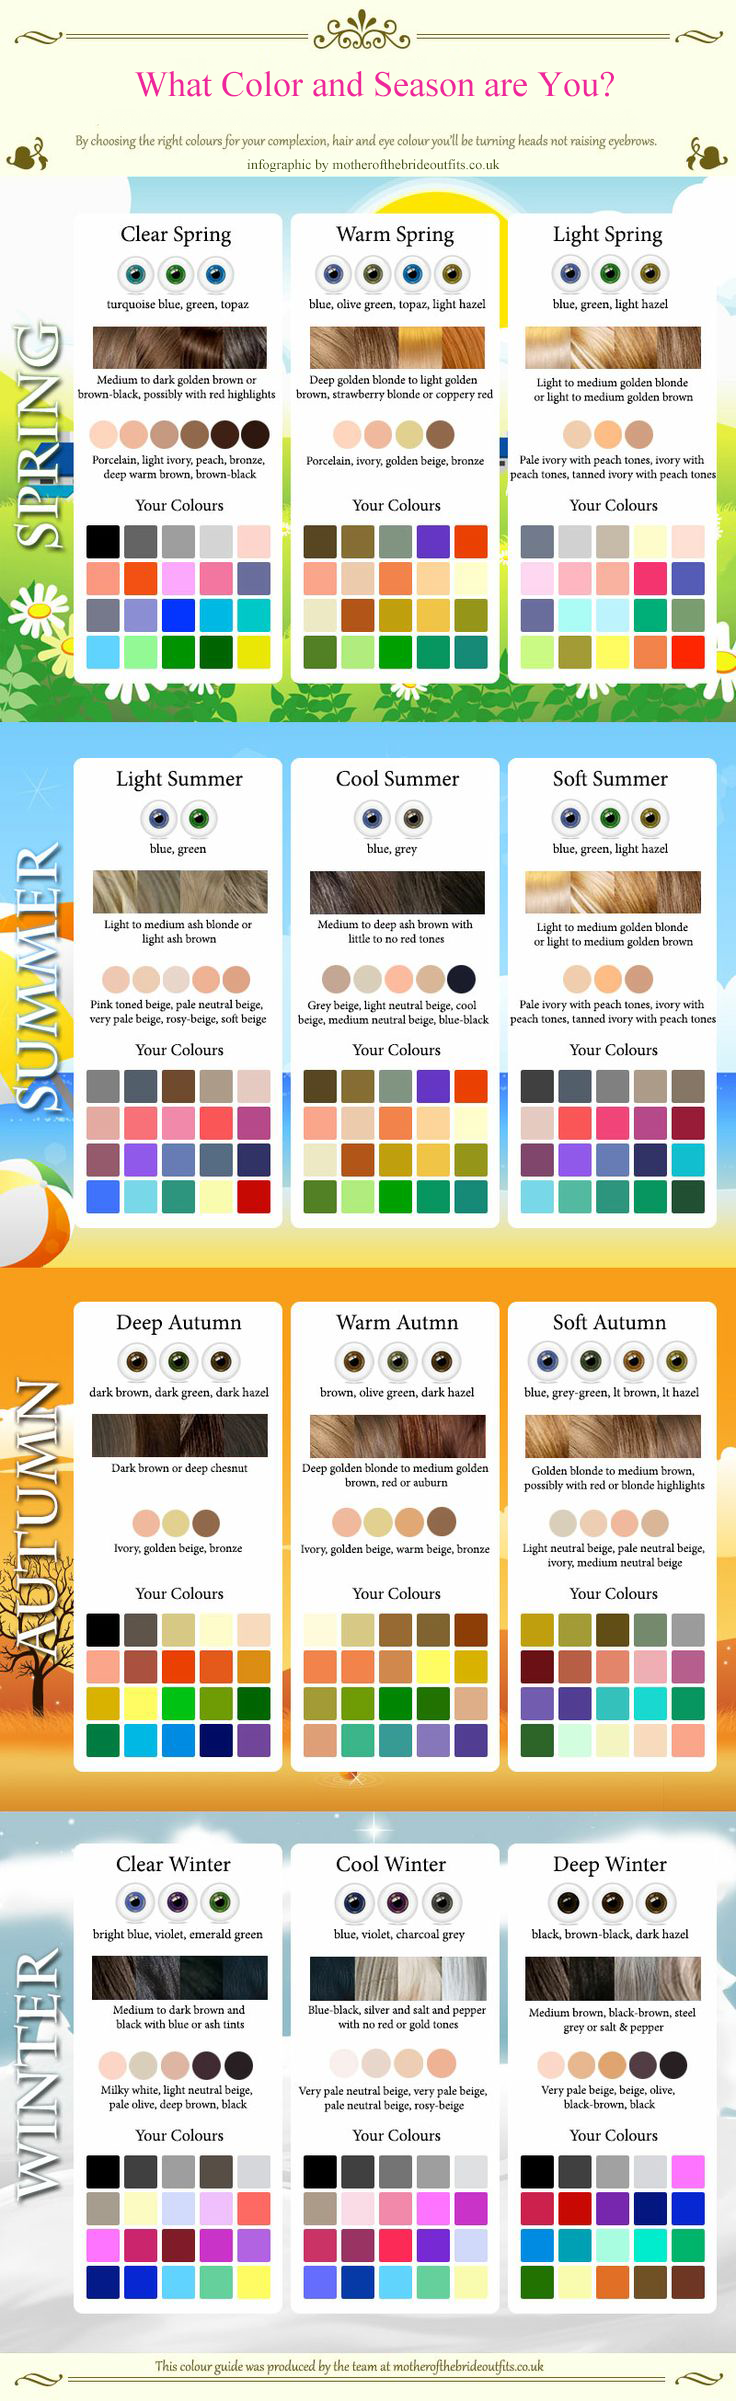 Clothing Color Chart Skin Tones